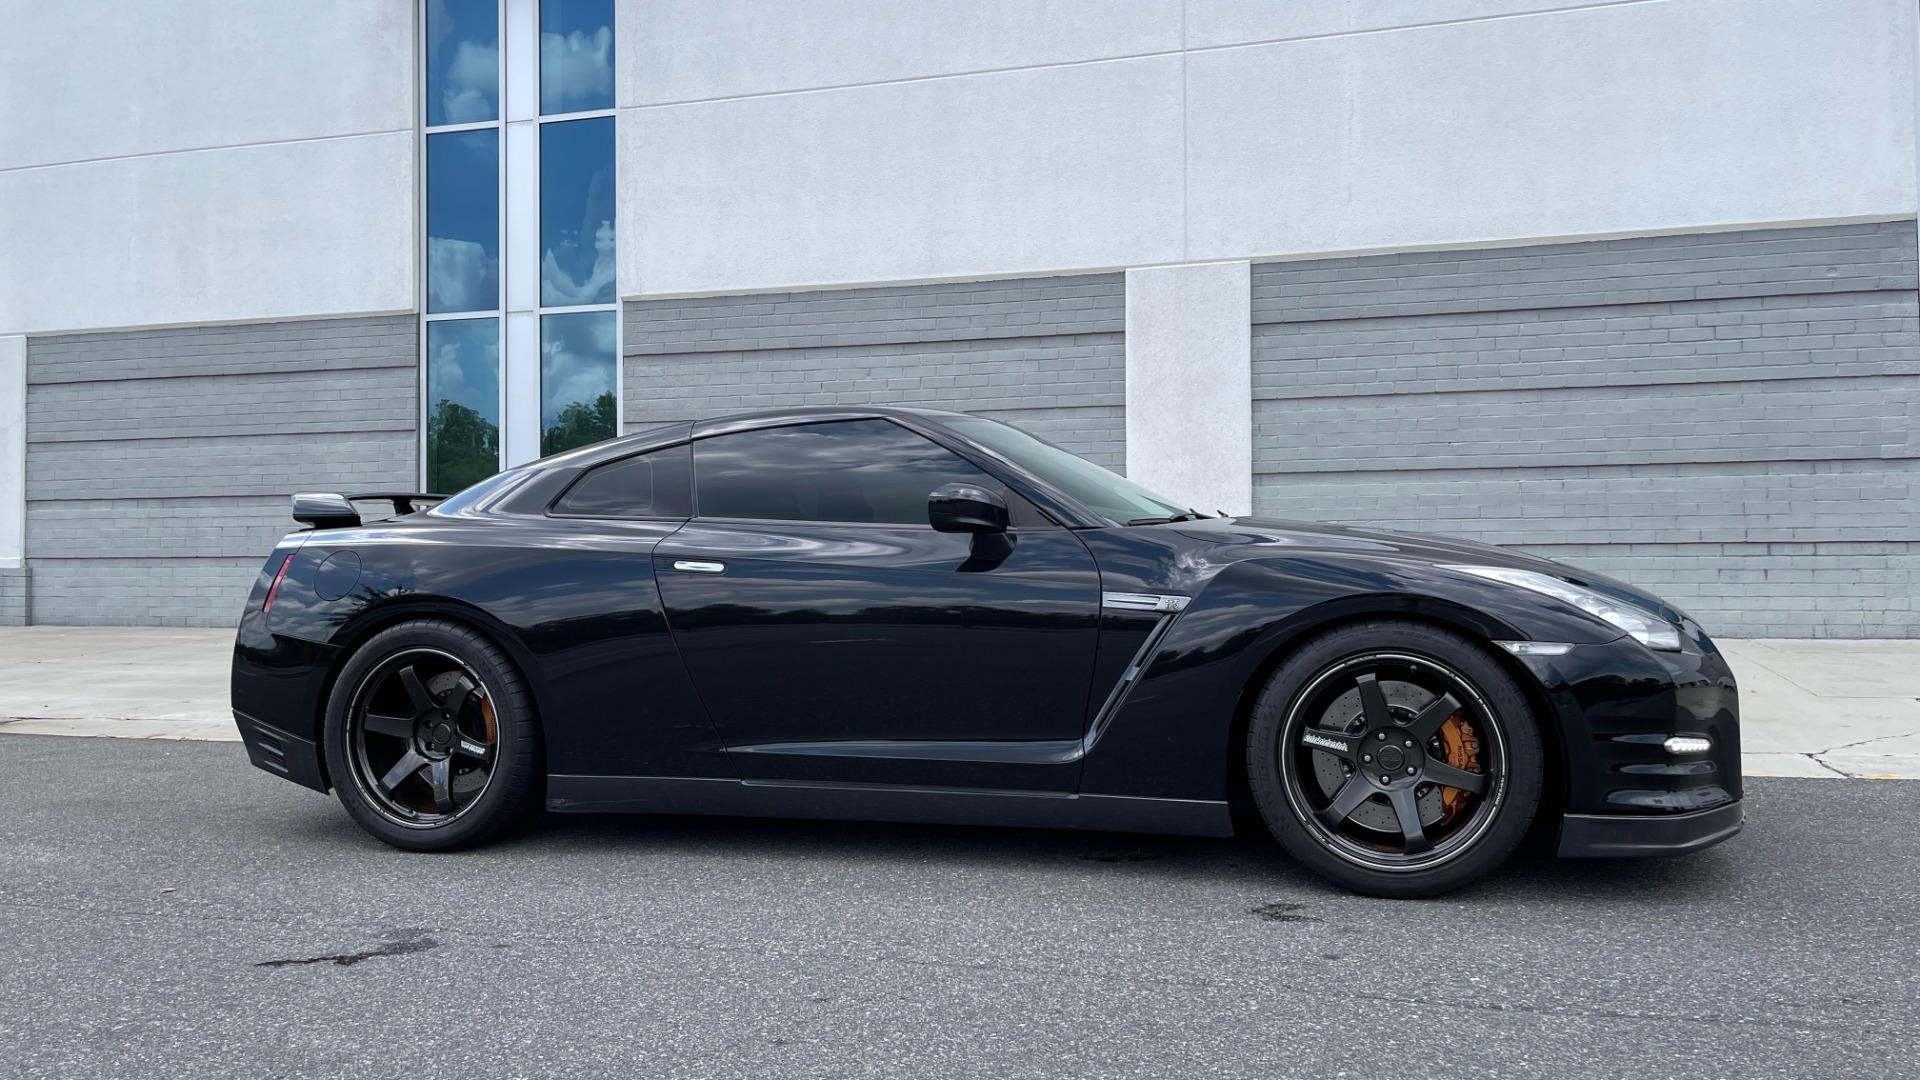 Used 2013 Nissan GT-R PREMIUM COUPE / 3.8L TWIN-TURBO / 6-SPD AUTO / COLD WTHR PKG / CAMERA for sale Sold at Formula Imports in Charlotte NC 28227 10